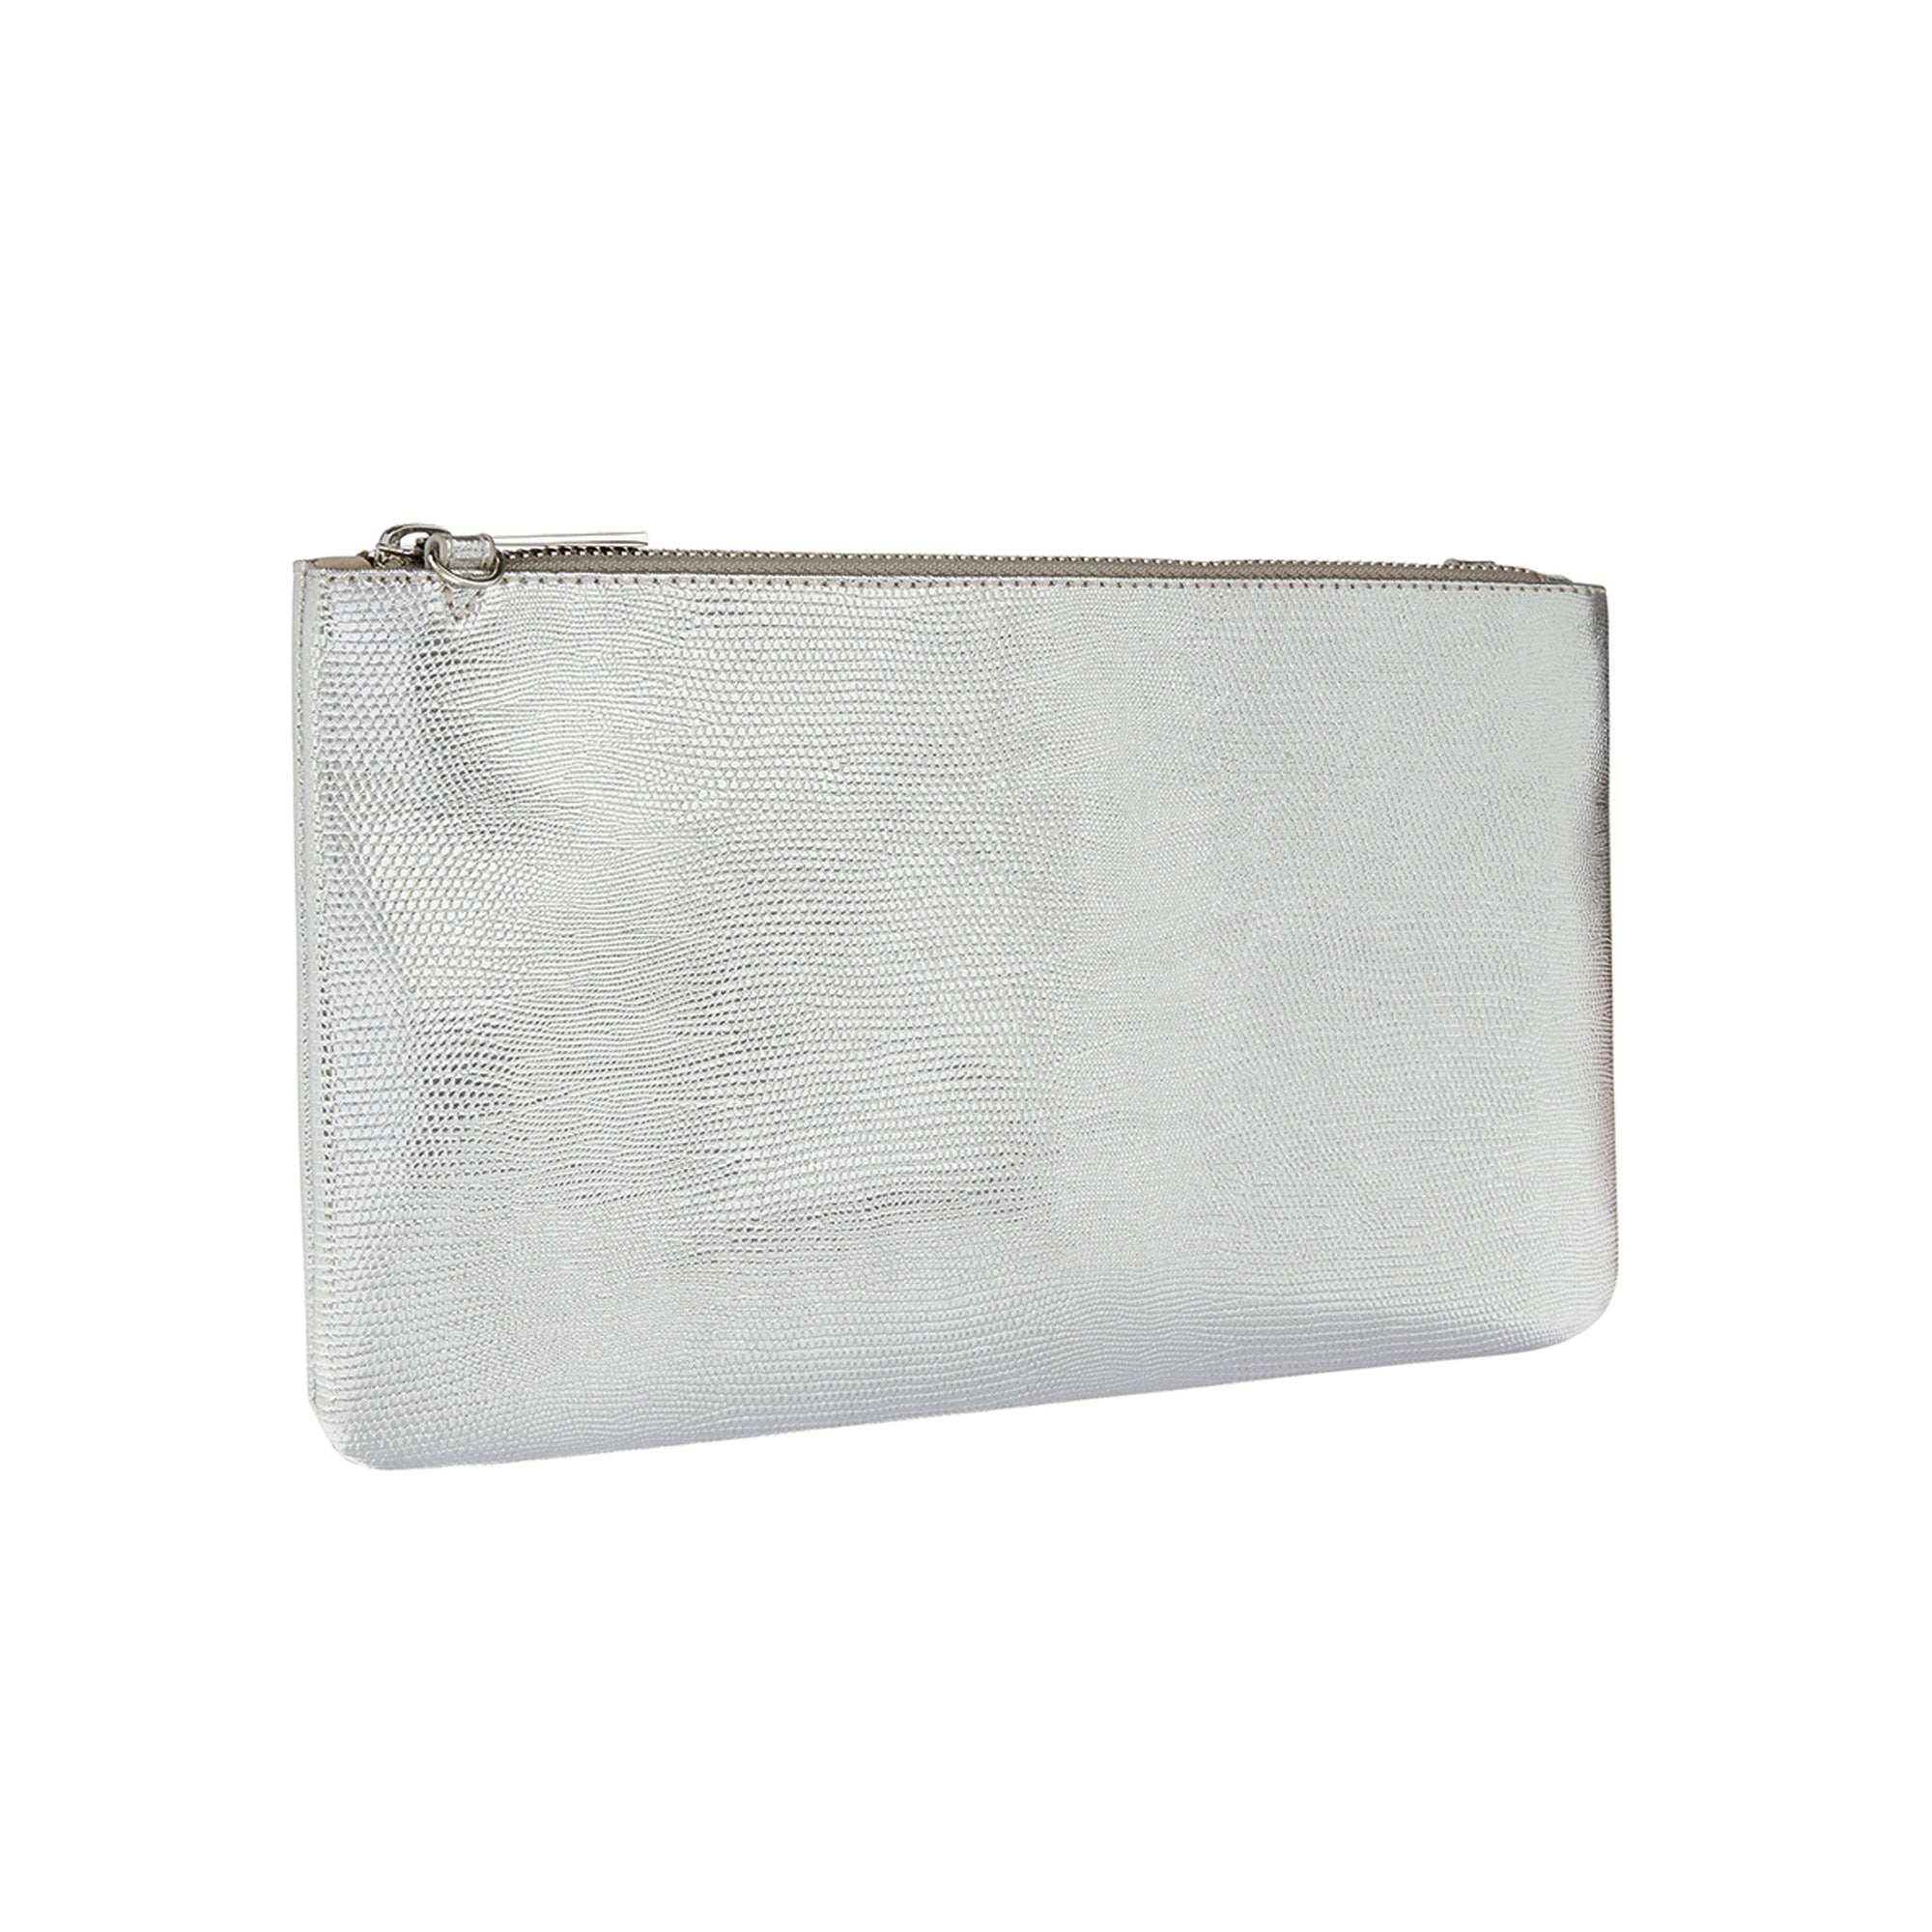 Silver Evening Bag Clutch Purse with Rhinestone and Chains | Baginning